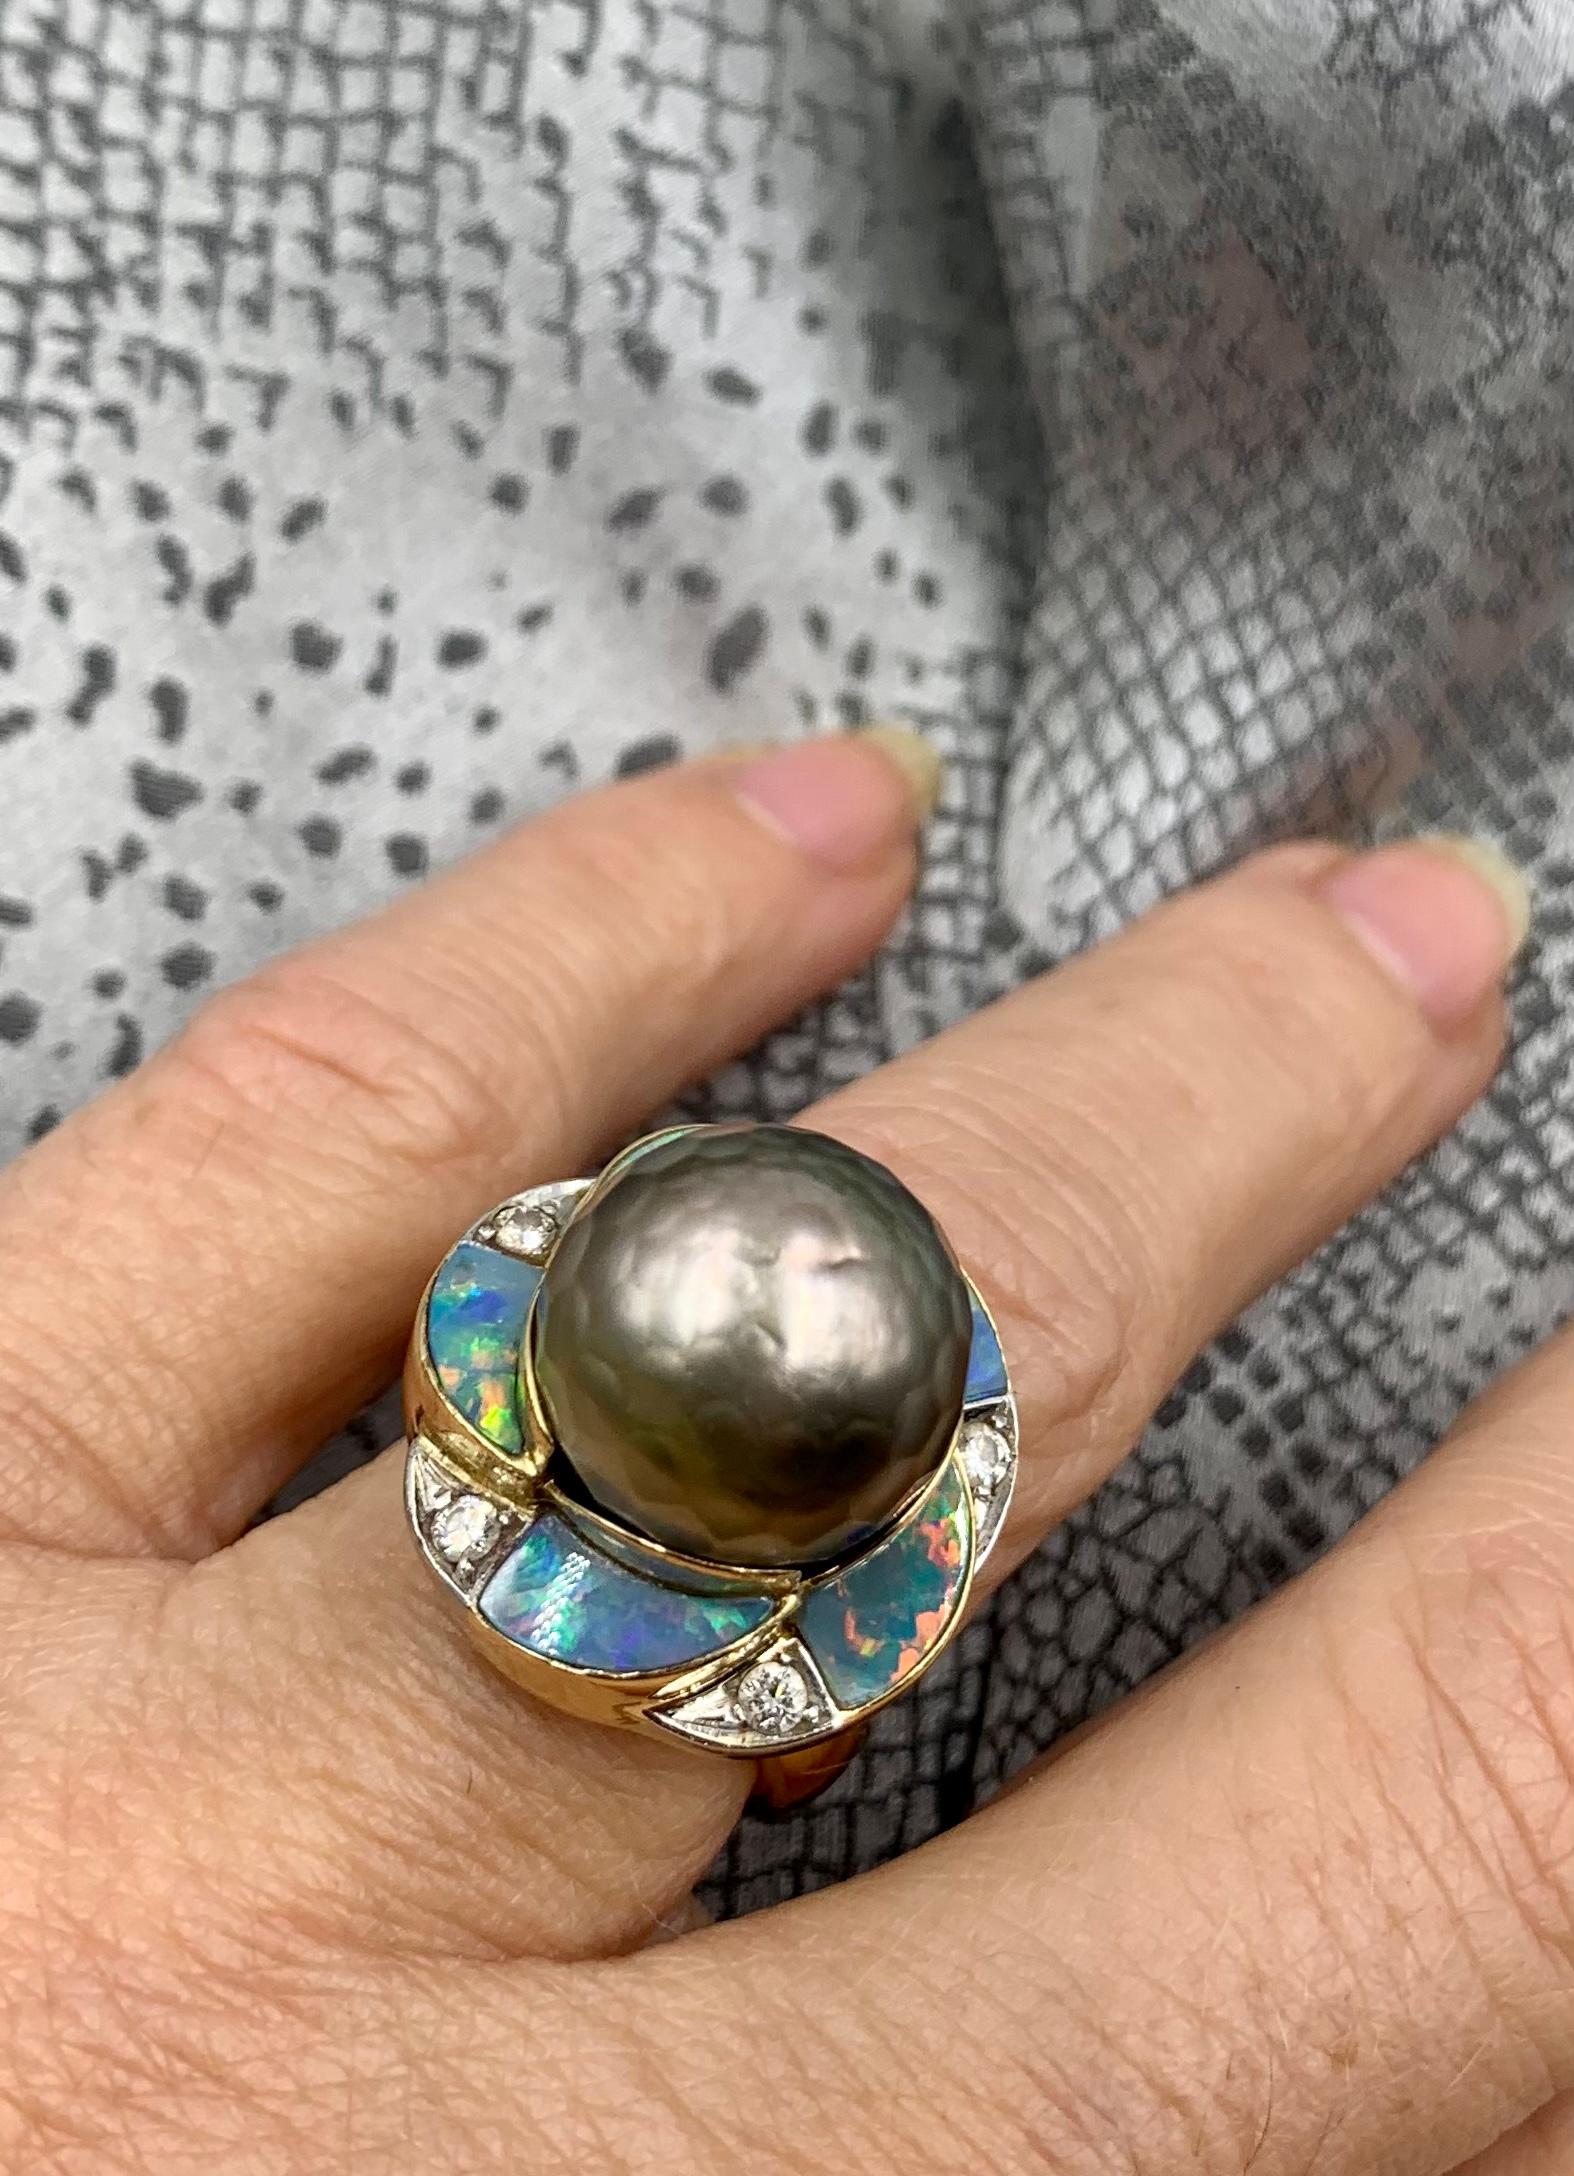 Centering a 13.4mm faceted silvery black freshwater cultured pearl, accented by black opals and diamonds.
Faceted pearls were first created in 1992 by Kazuo Komatsu. Early examples such as the pearl in this ring are quite rare. In recent times,